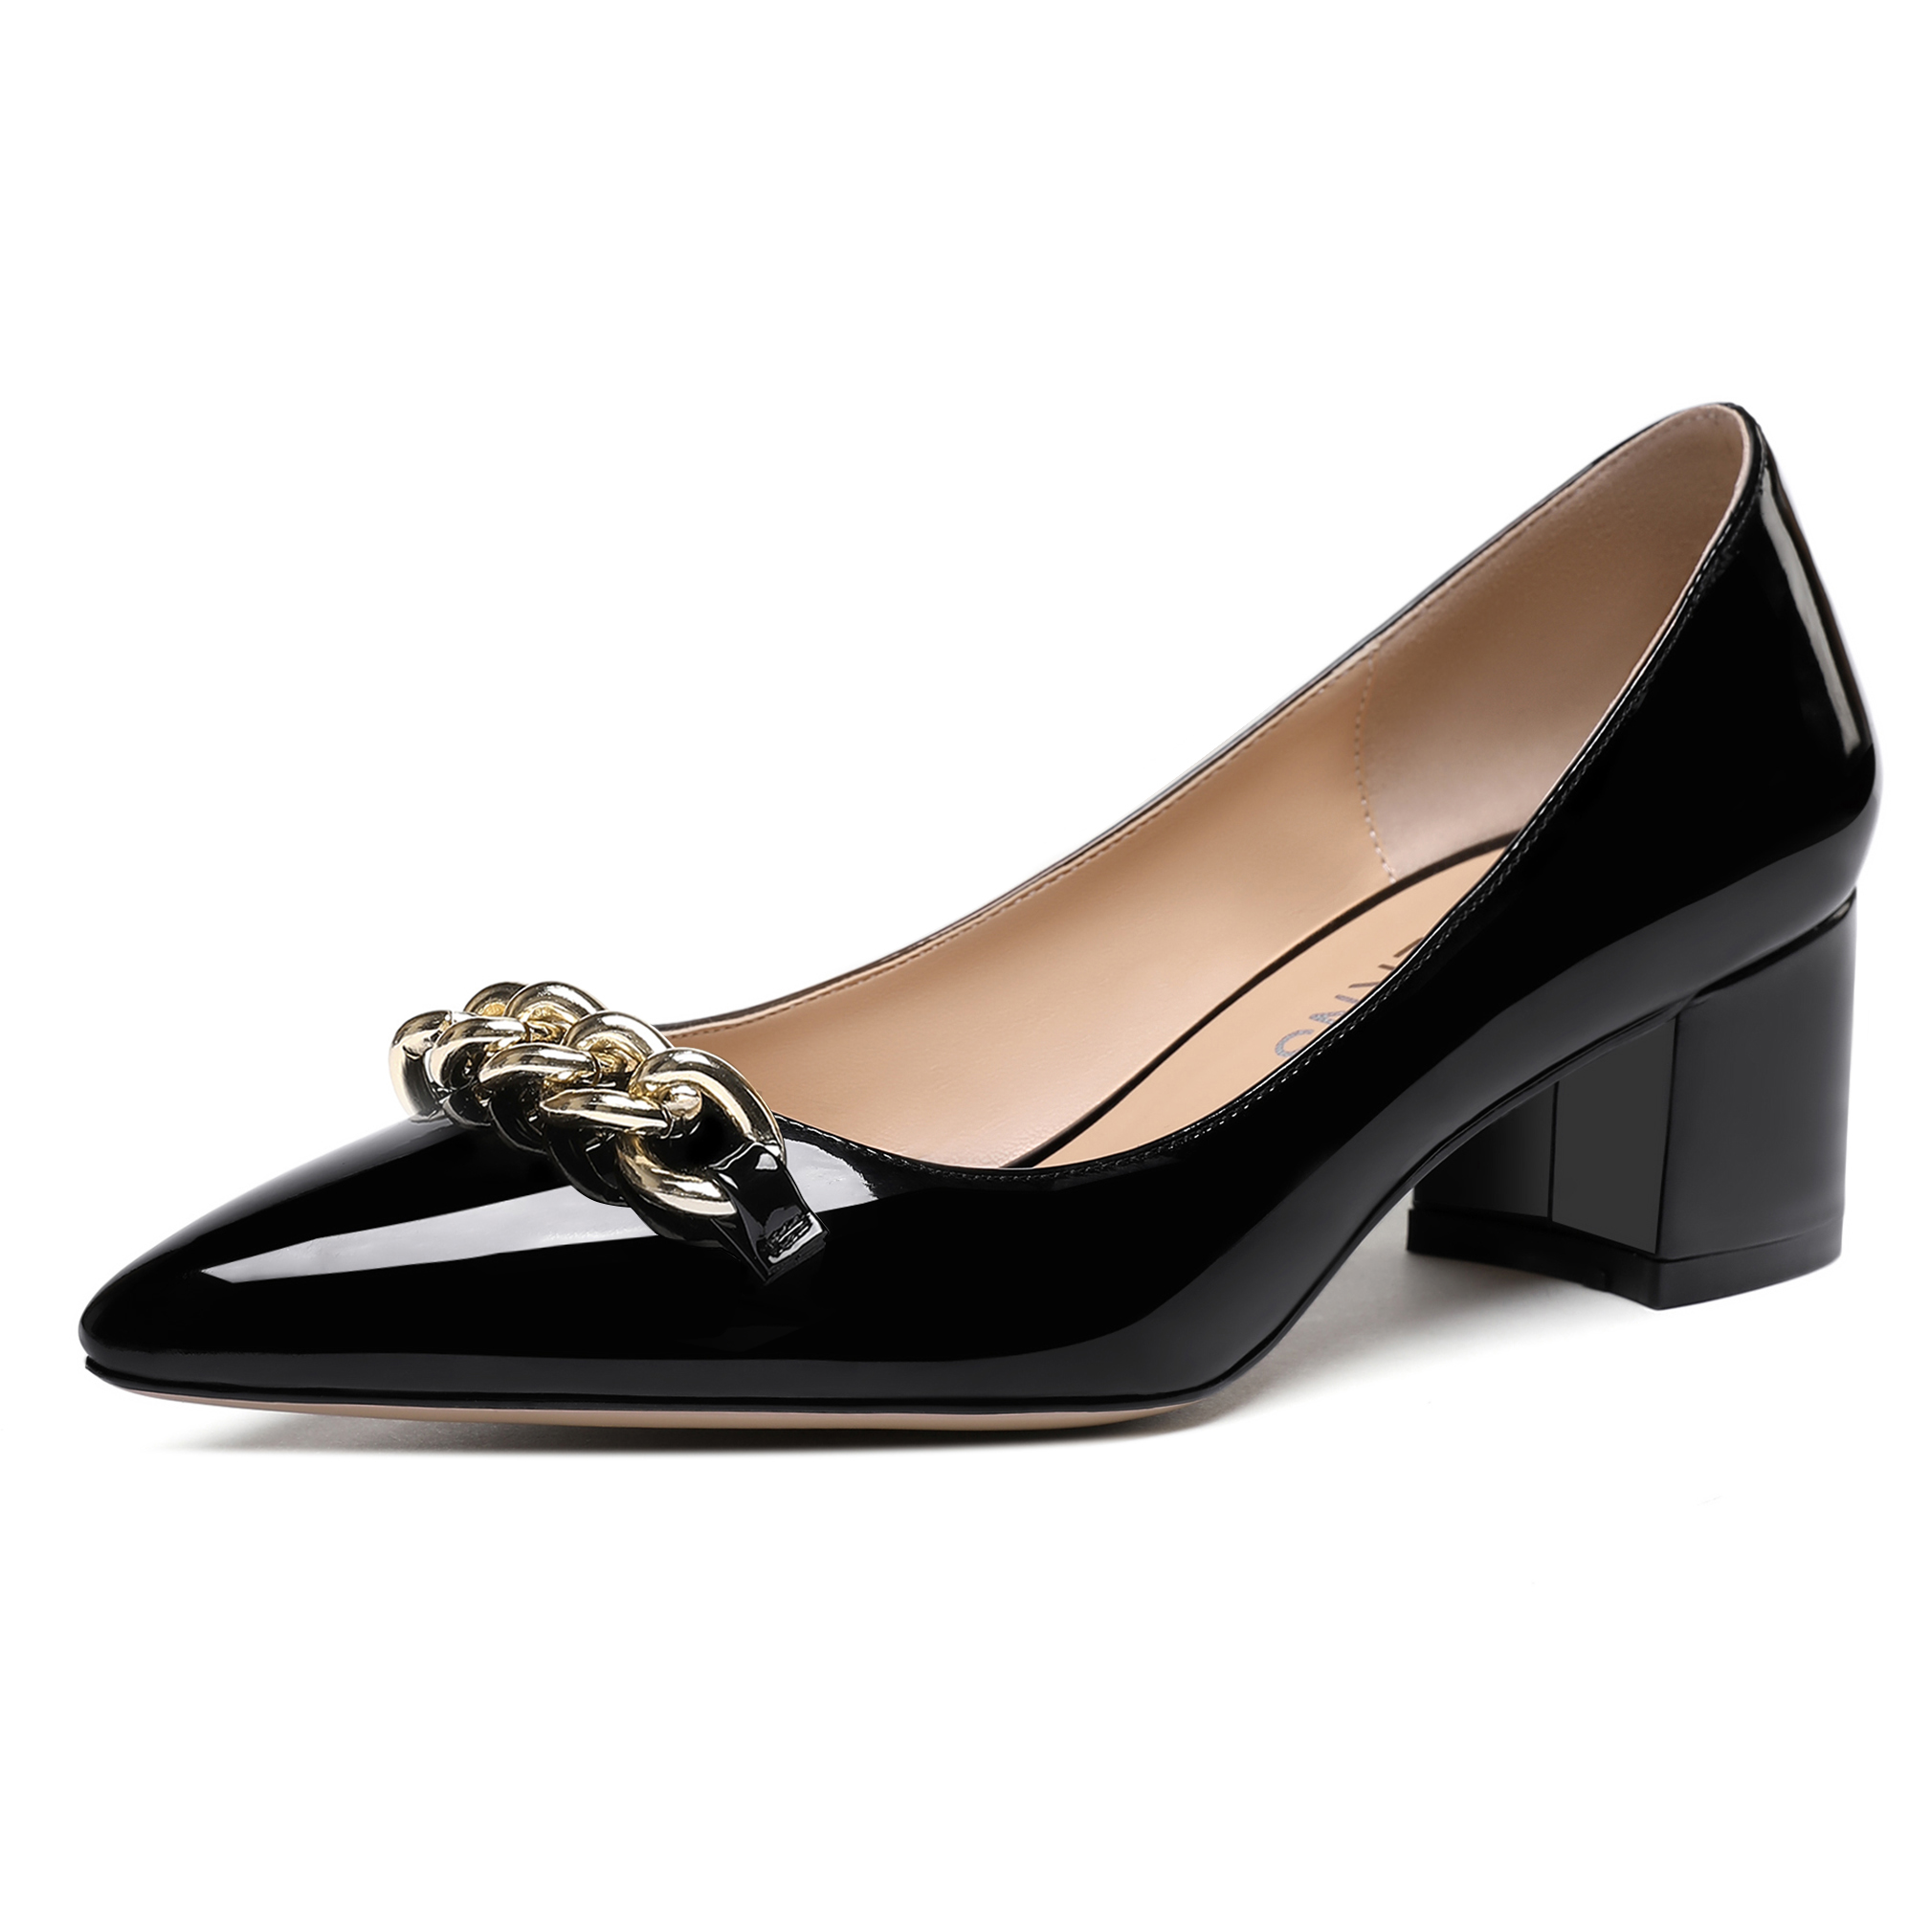 Delylah Pointed Toe Slip On Patent Pumps Heels